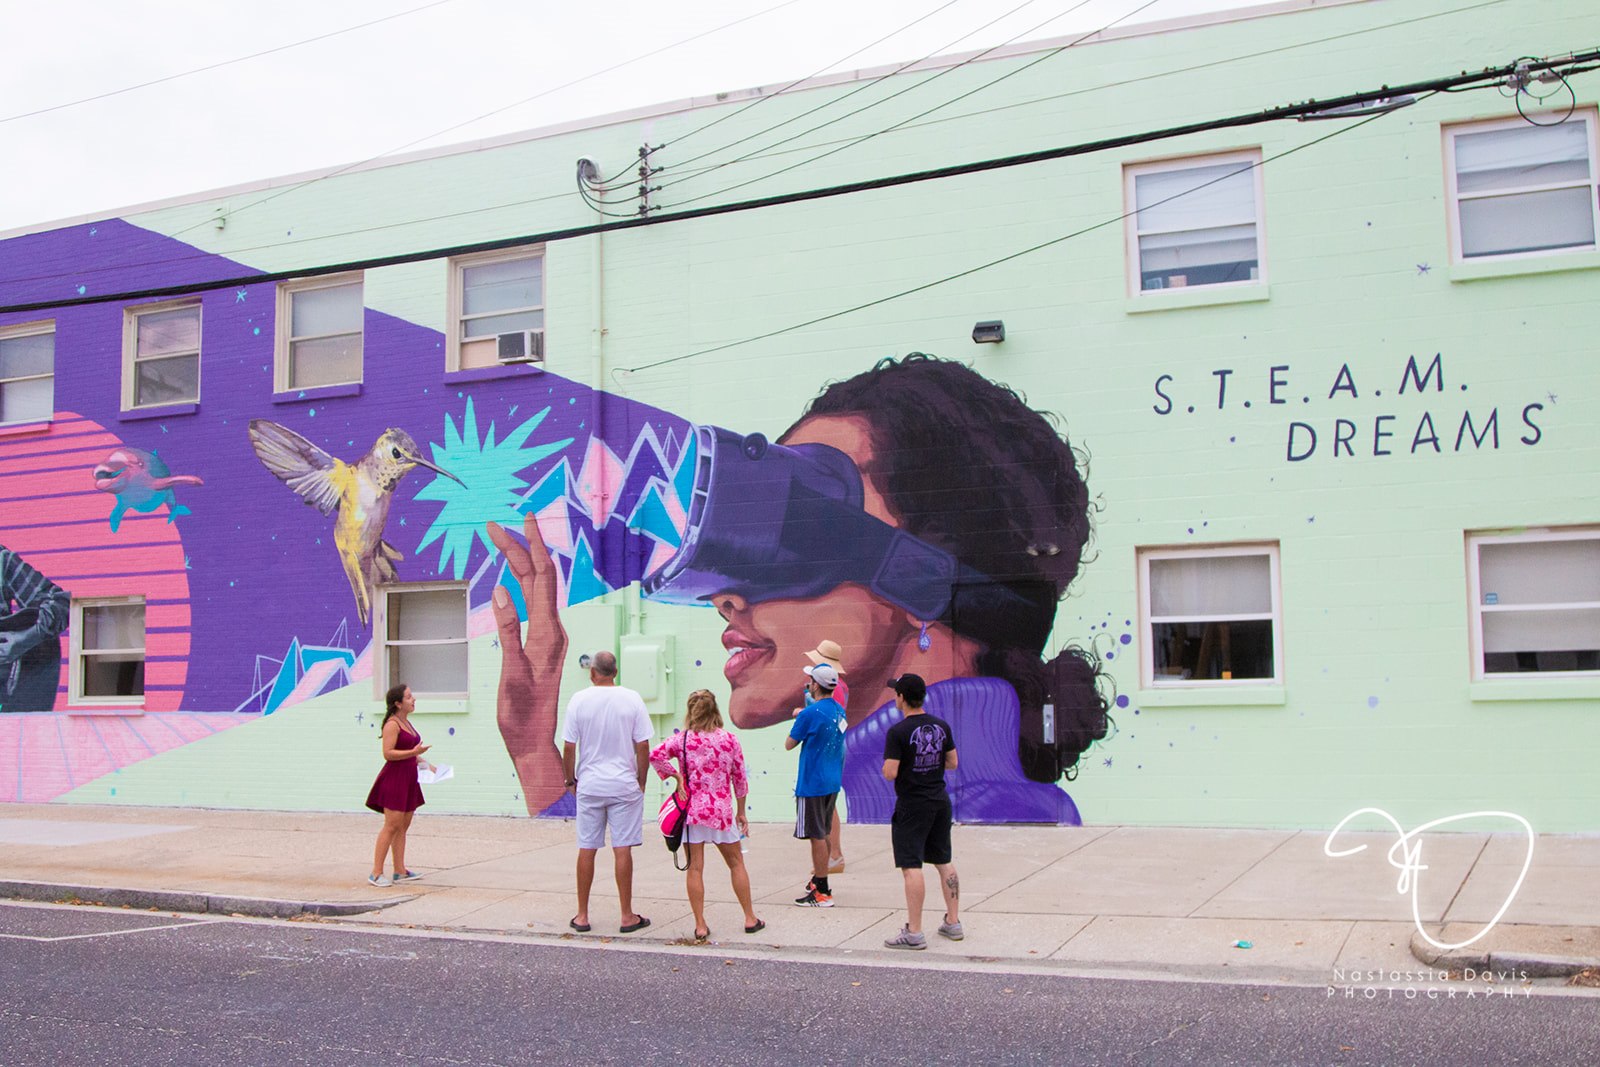 Photo of a mural by LNY titled S.T.E.A.M. DREAMS. The mural features the face of Black female-presenting individual in a purple shirt. She is wearing navy goggles that seem to be showing her a grey, white and yellow hummingbird, as well as a dolphin and various shapes that are blue, pink and turquoise. There are six individuals of varying heights and ages standing in front of the mural.